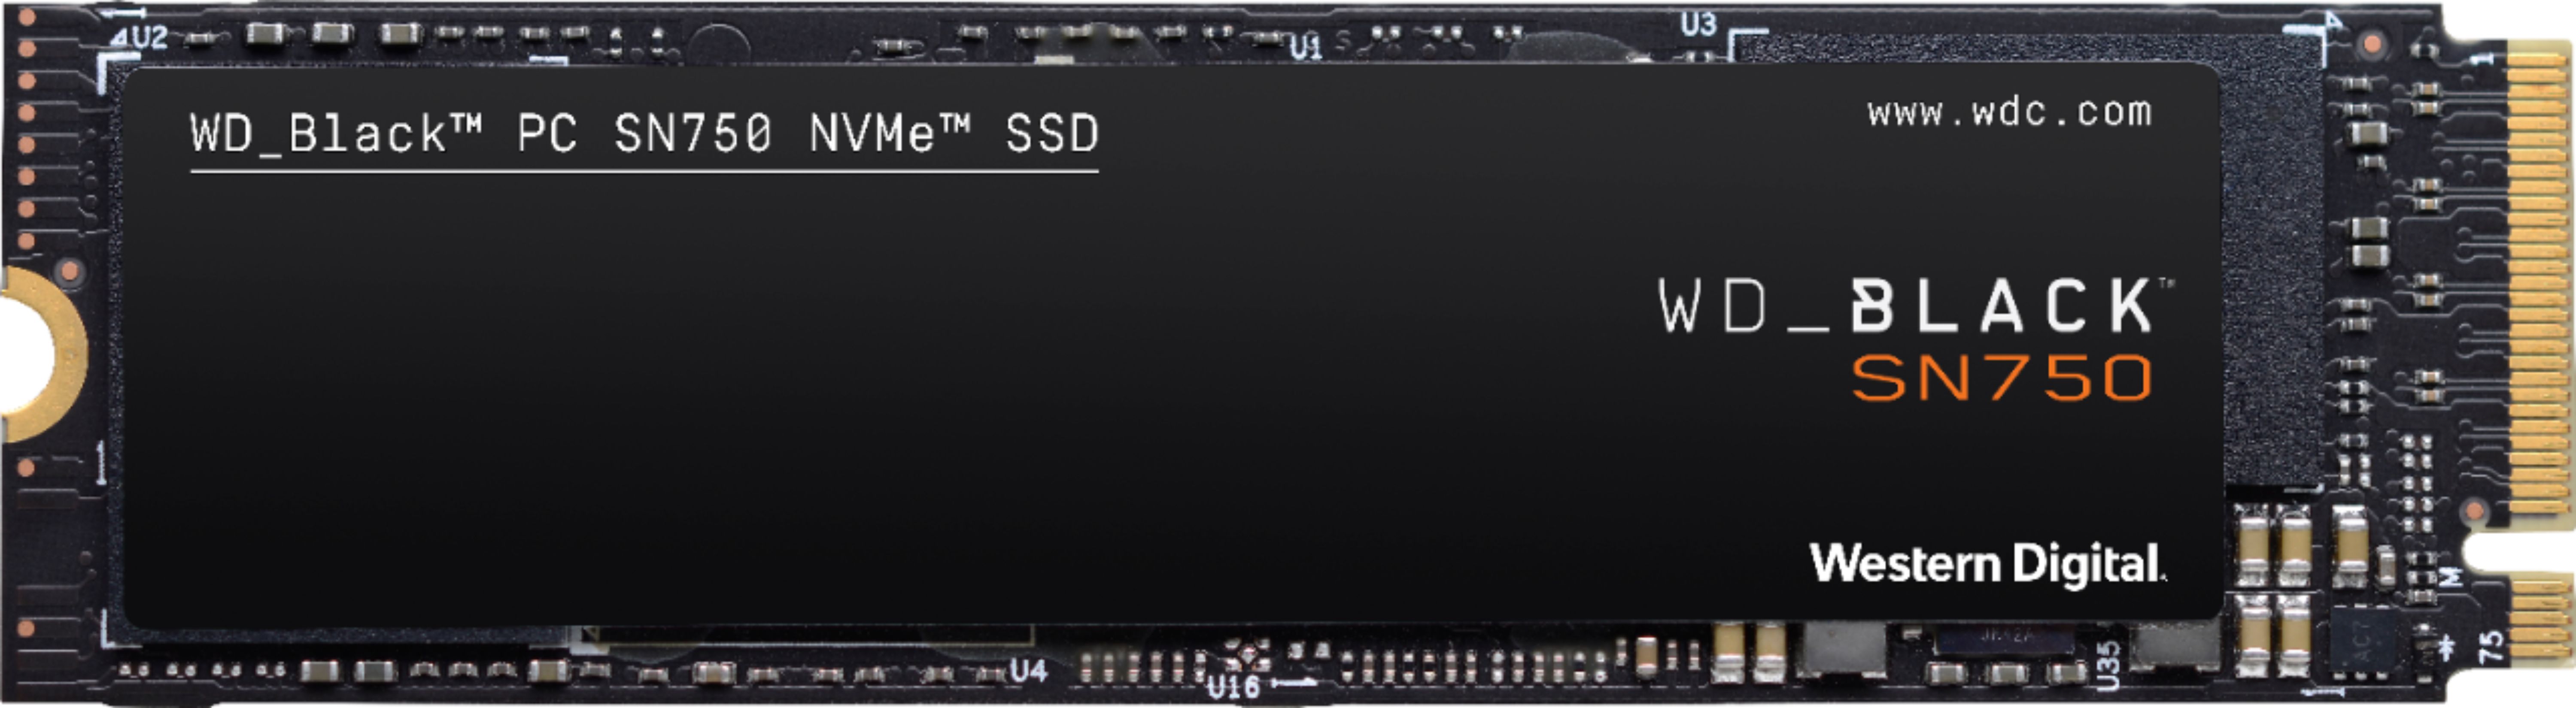 WD - WD_BLACK SN750 NVMe 500GB Internal PCI Express 3.0 x4 Solid State Drive for Laptops & Desktops